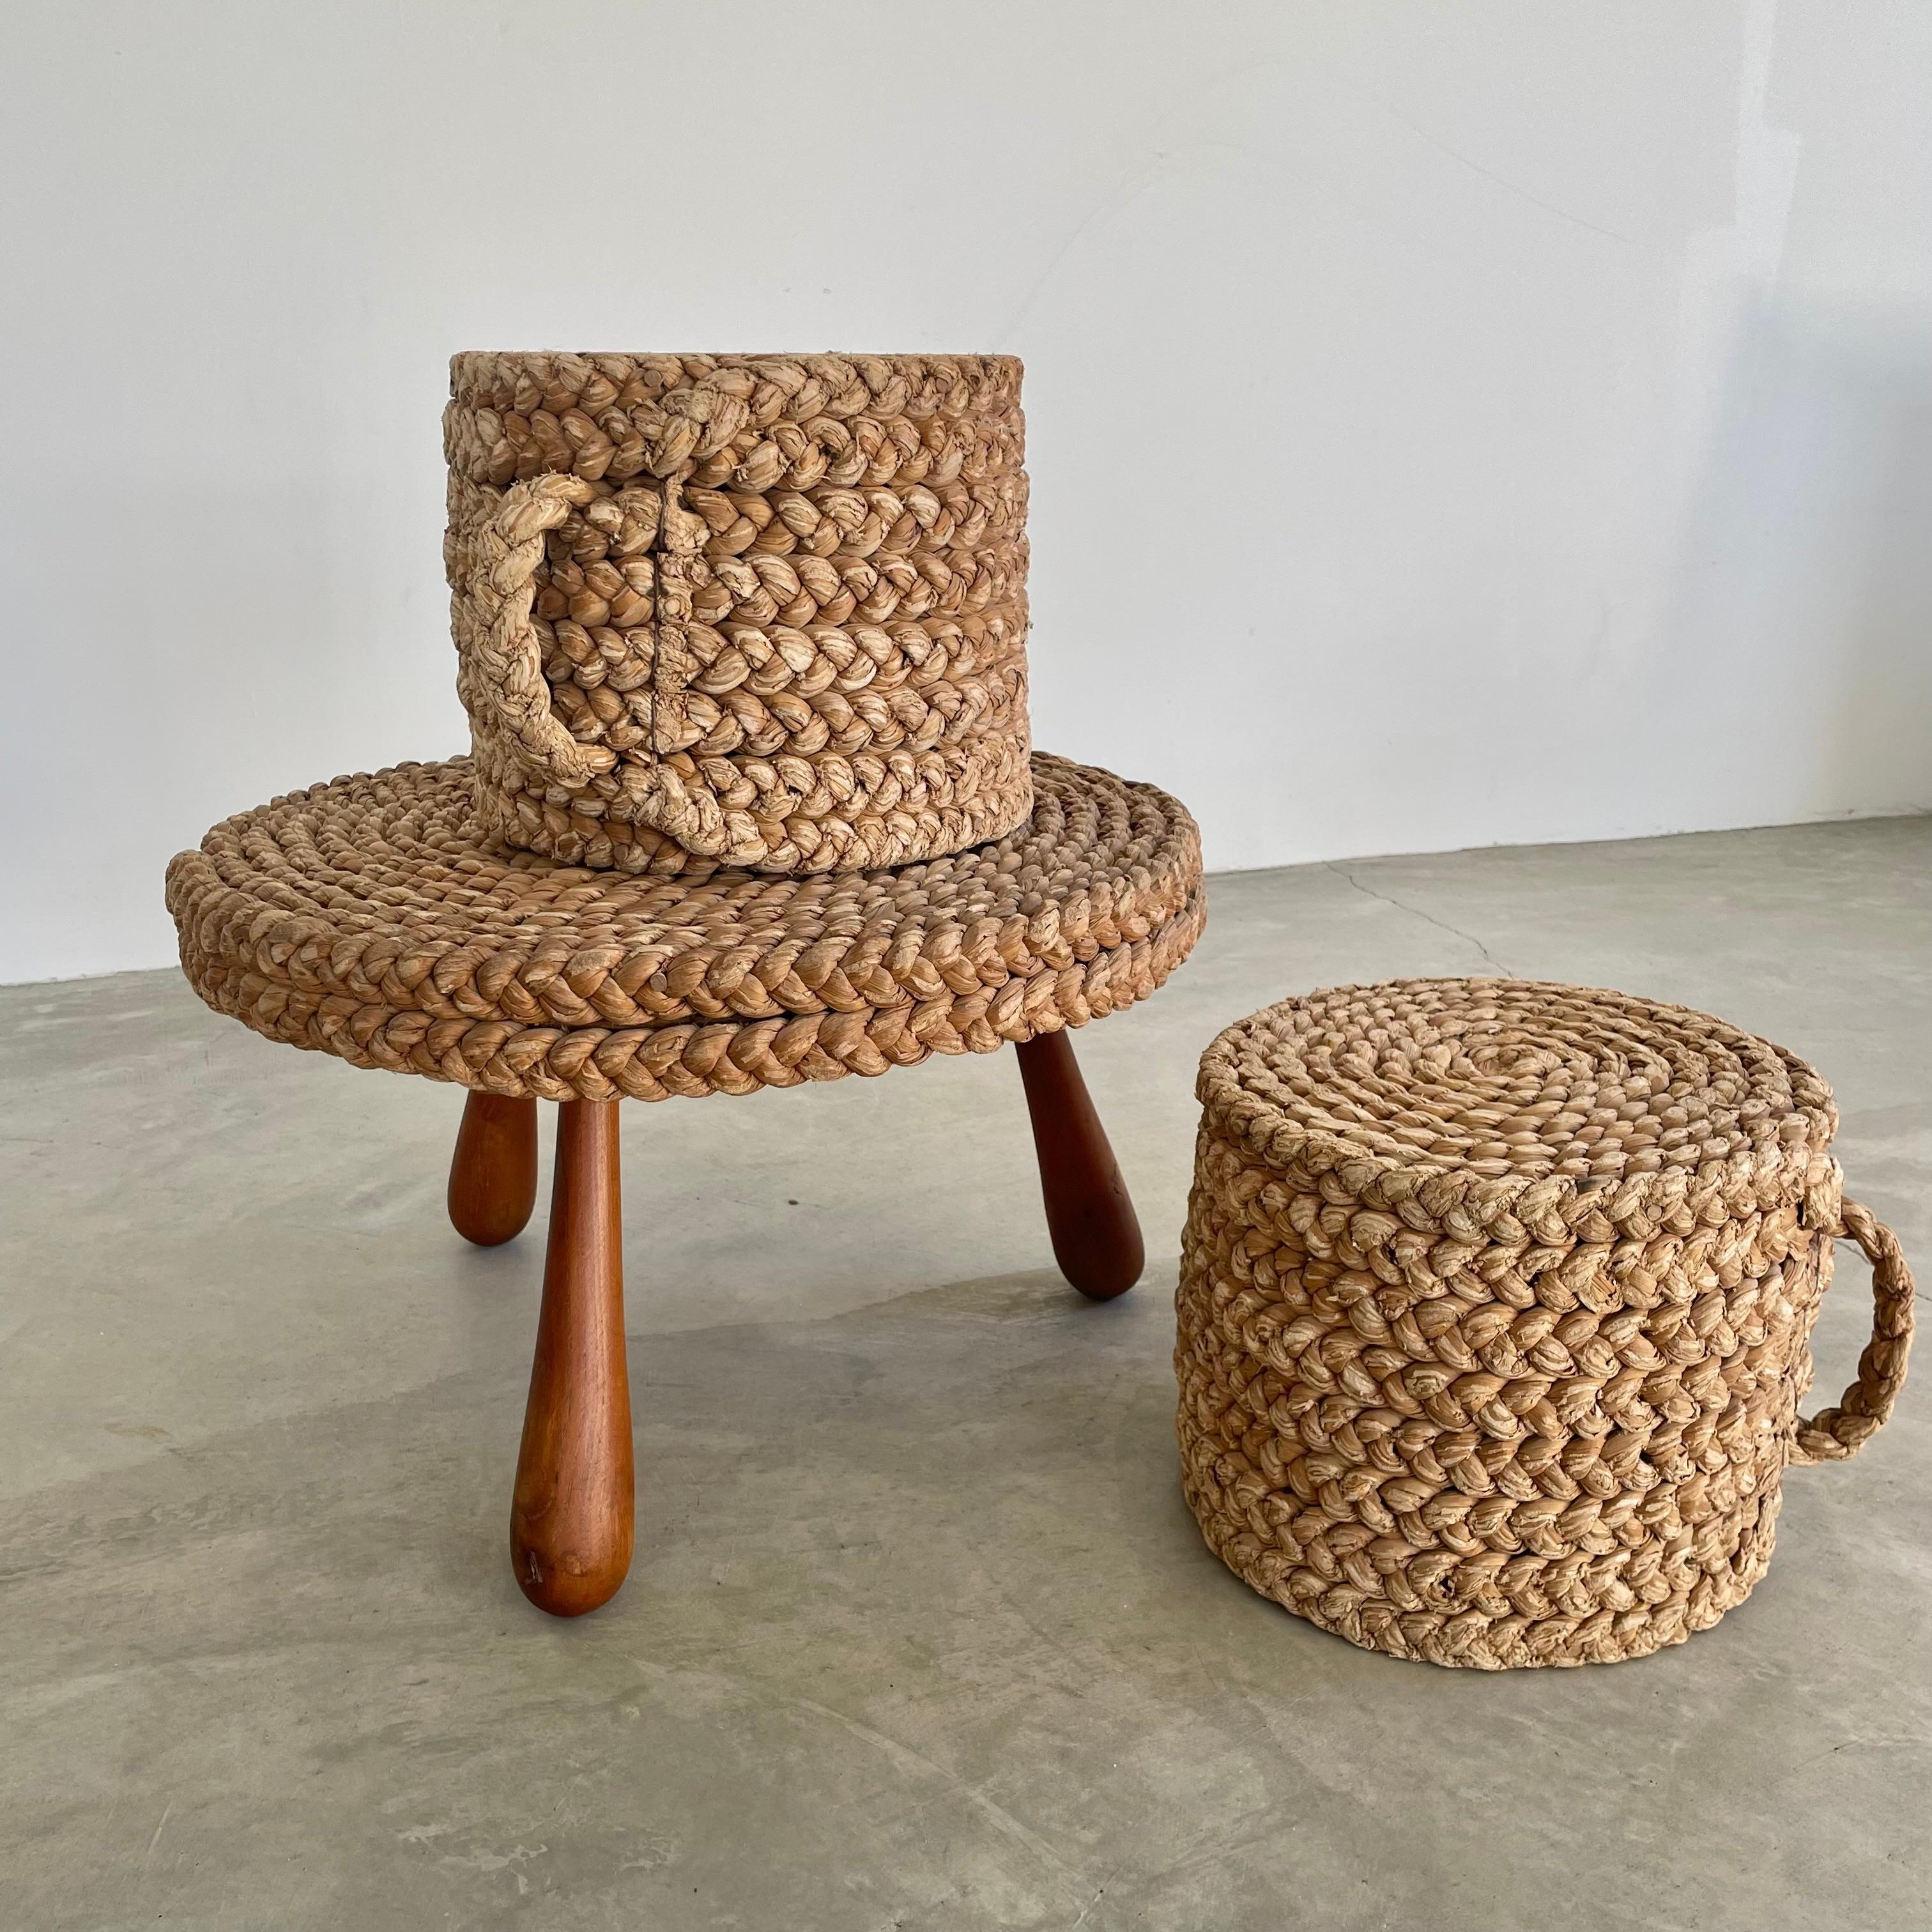 Rope and Wood Table with Two Nesting Stools, 1960s France For Sale 1